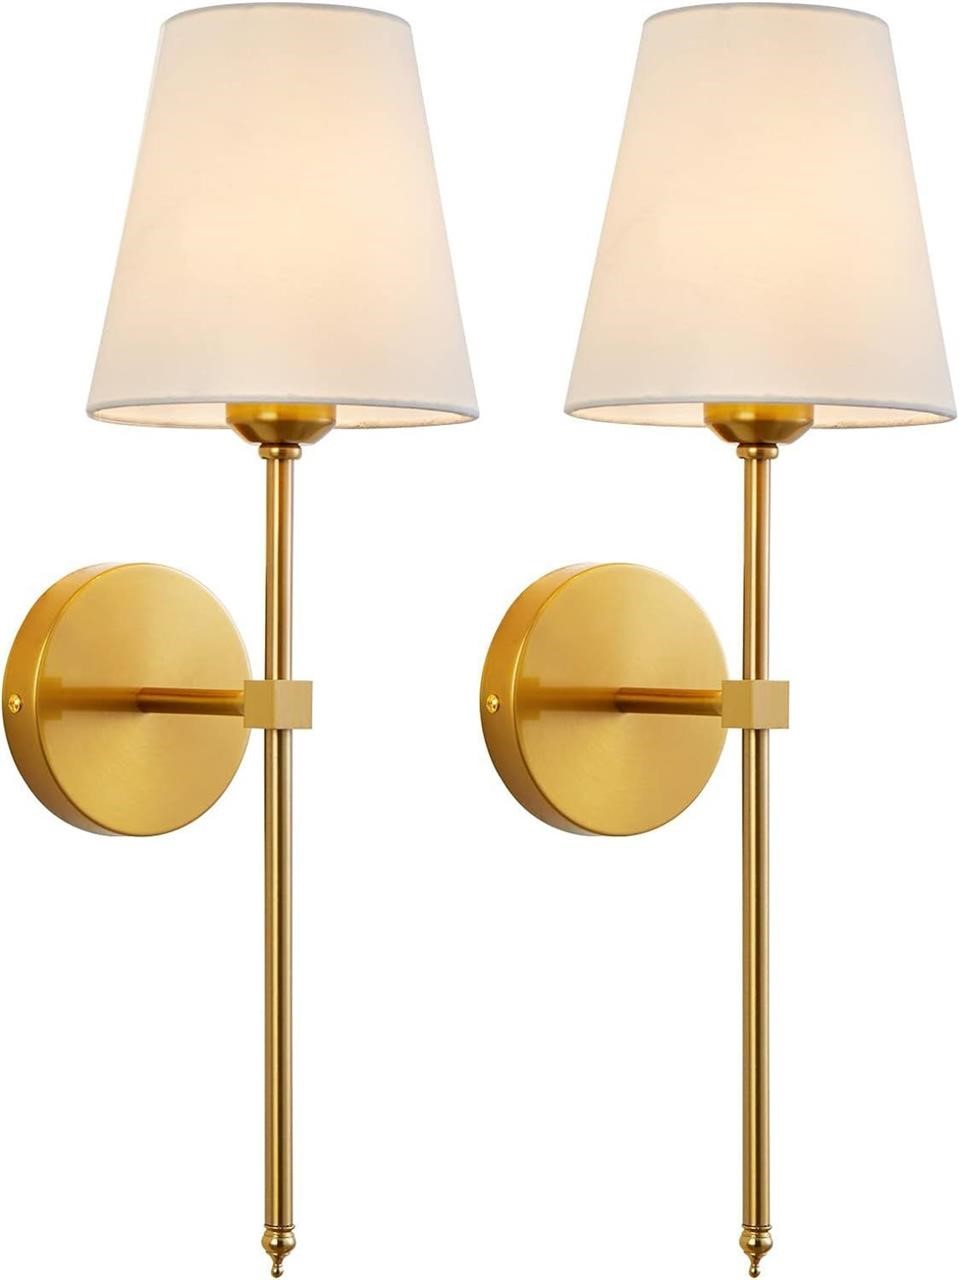 Wall Sconces Sets of 2,